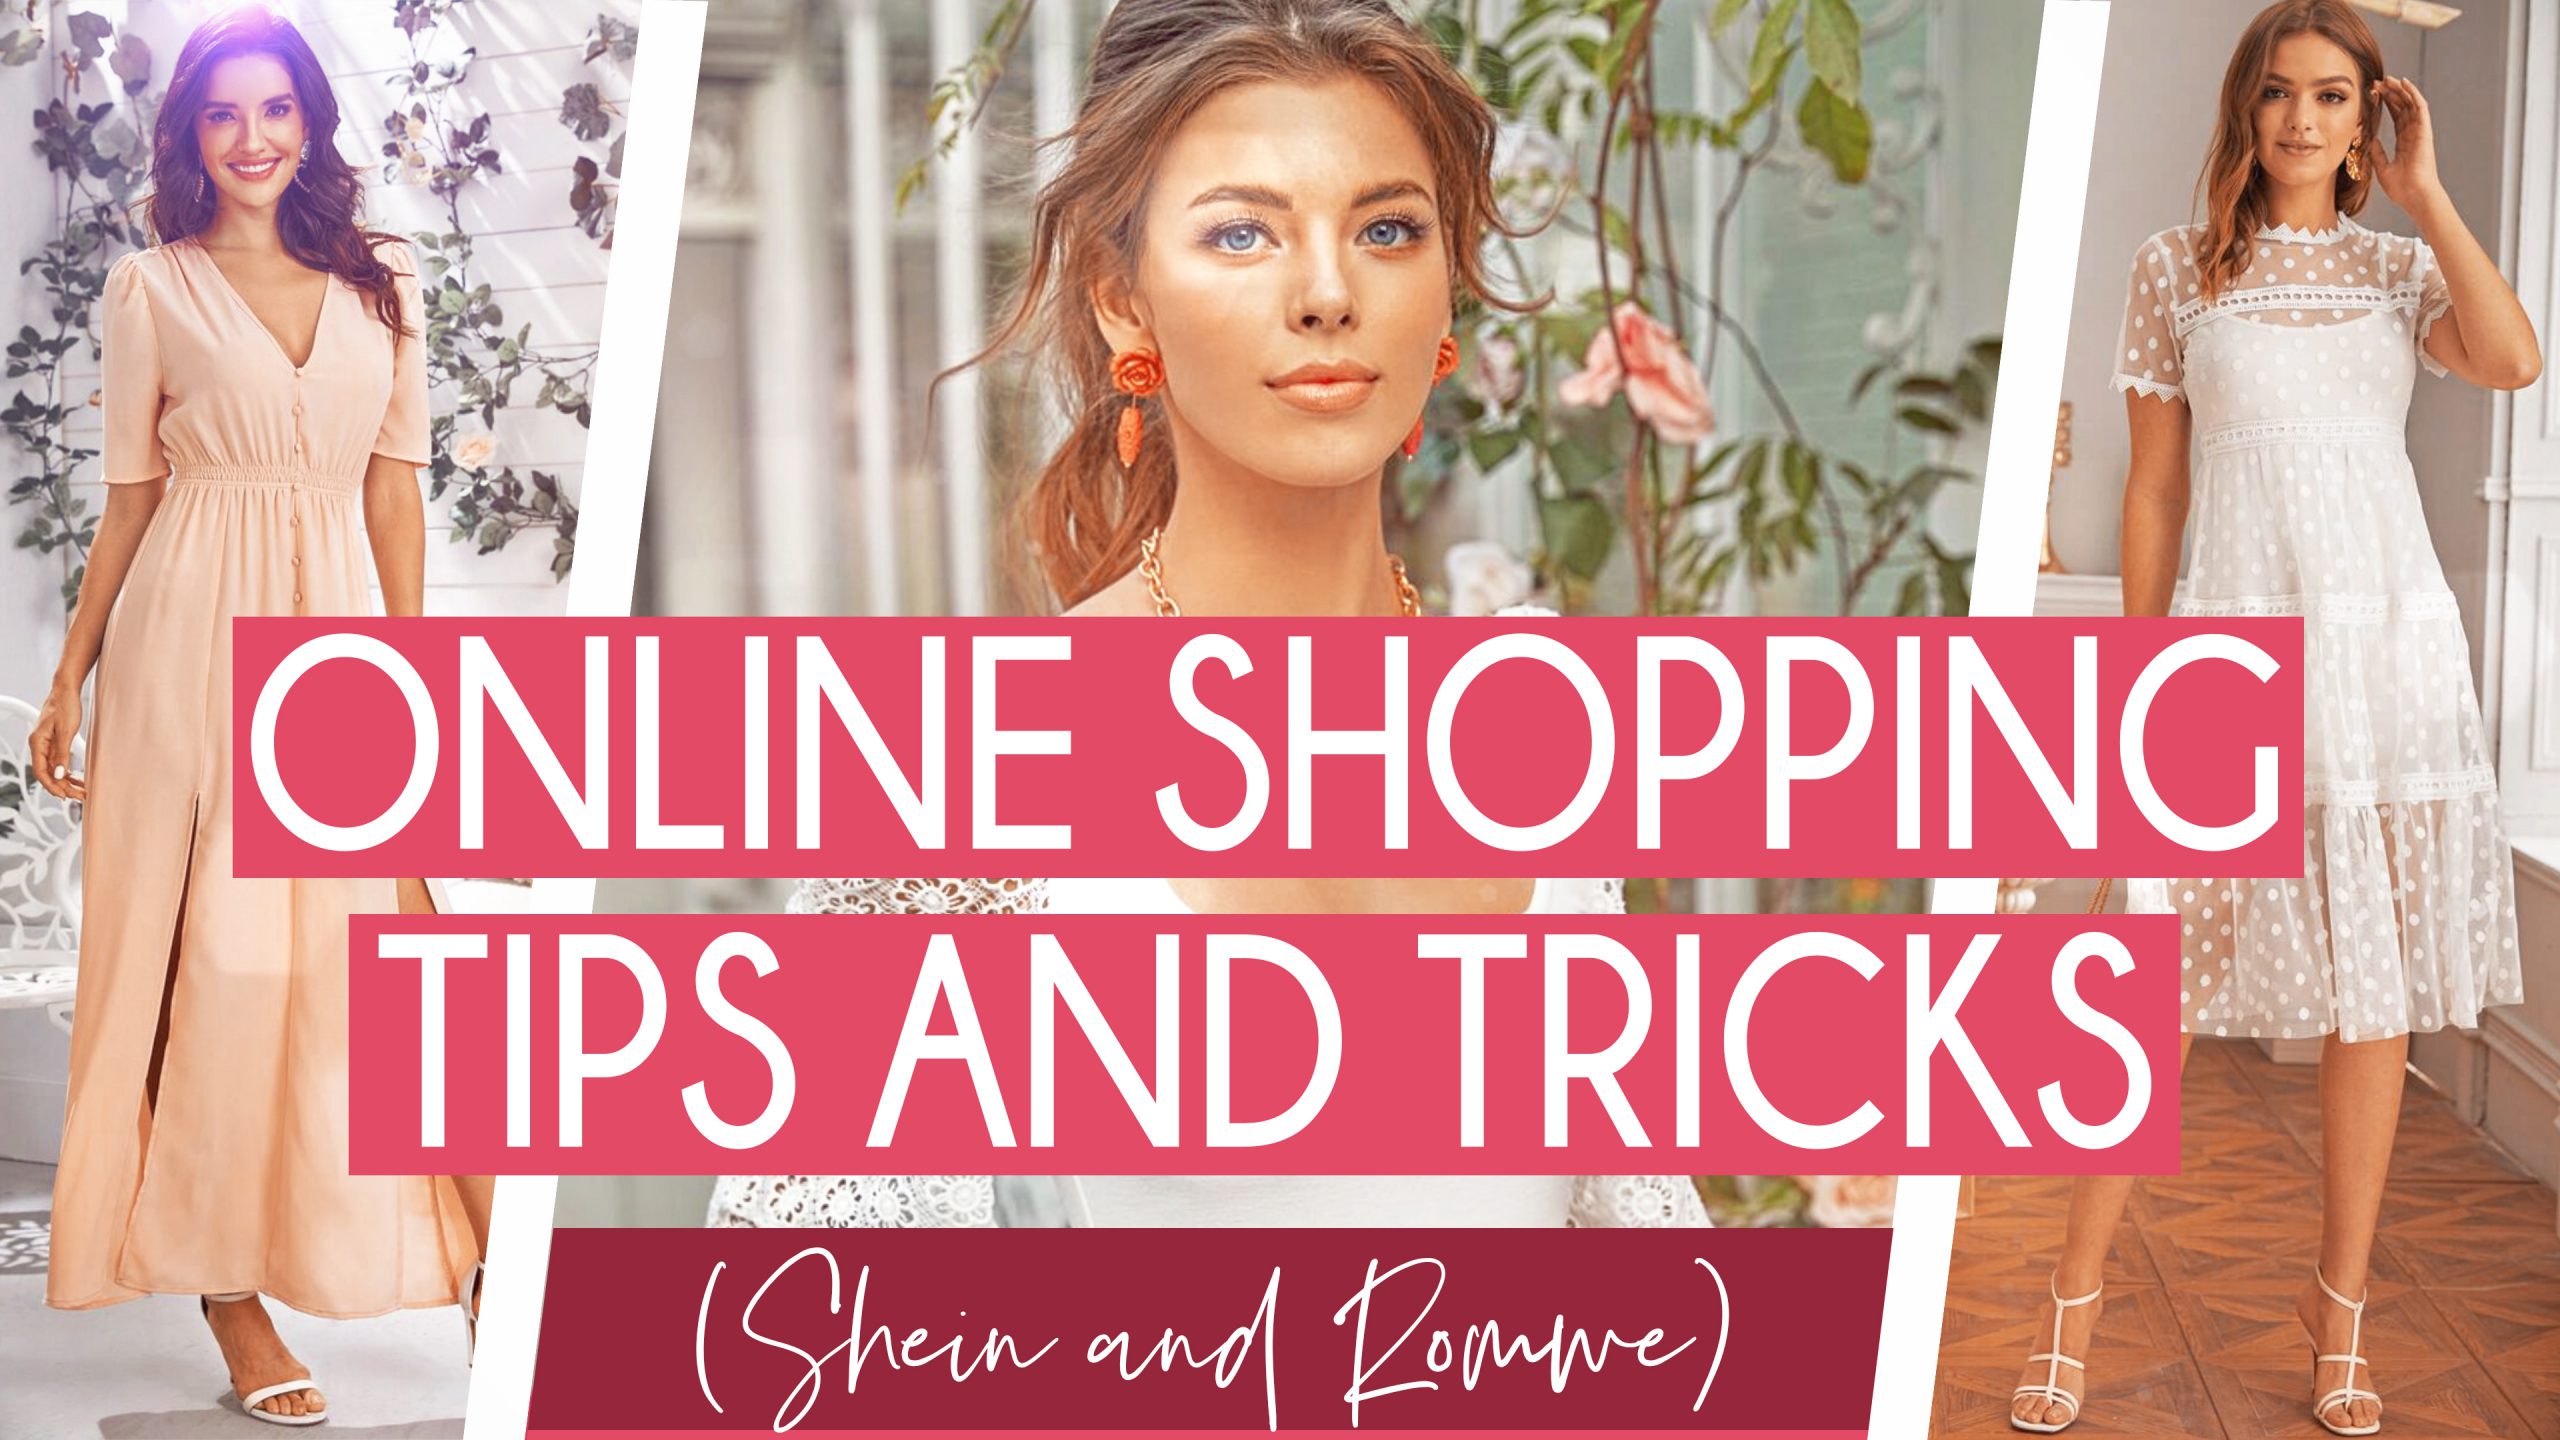 https://stylewithingrace.com/wp-content/uploads/2020/04/Shein-and-Romwe-Tips-and-Tricks-Youtube-Thumbnail-scaled.jpg